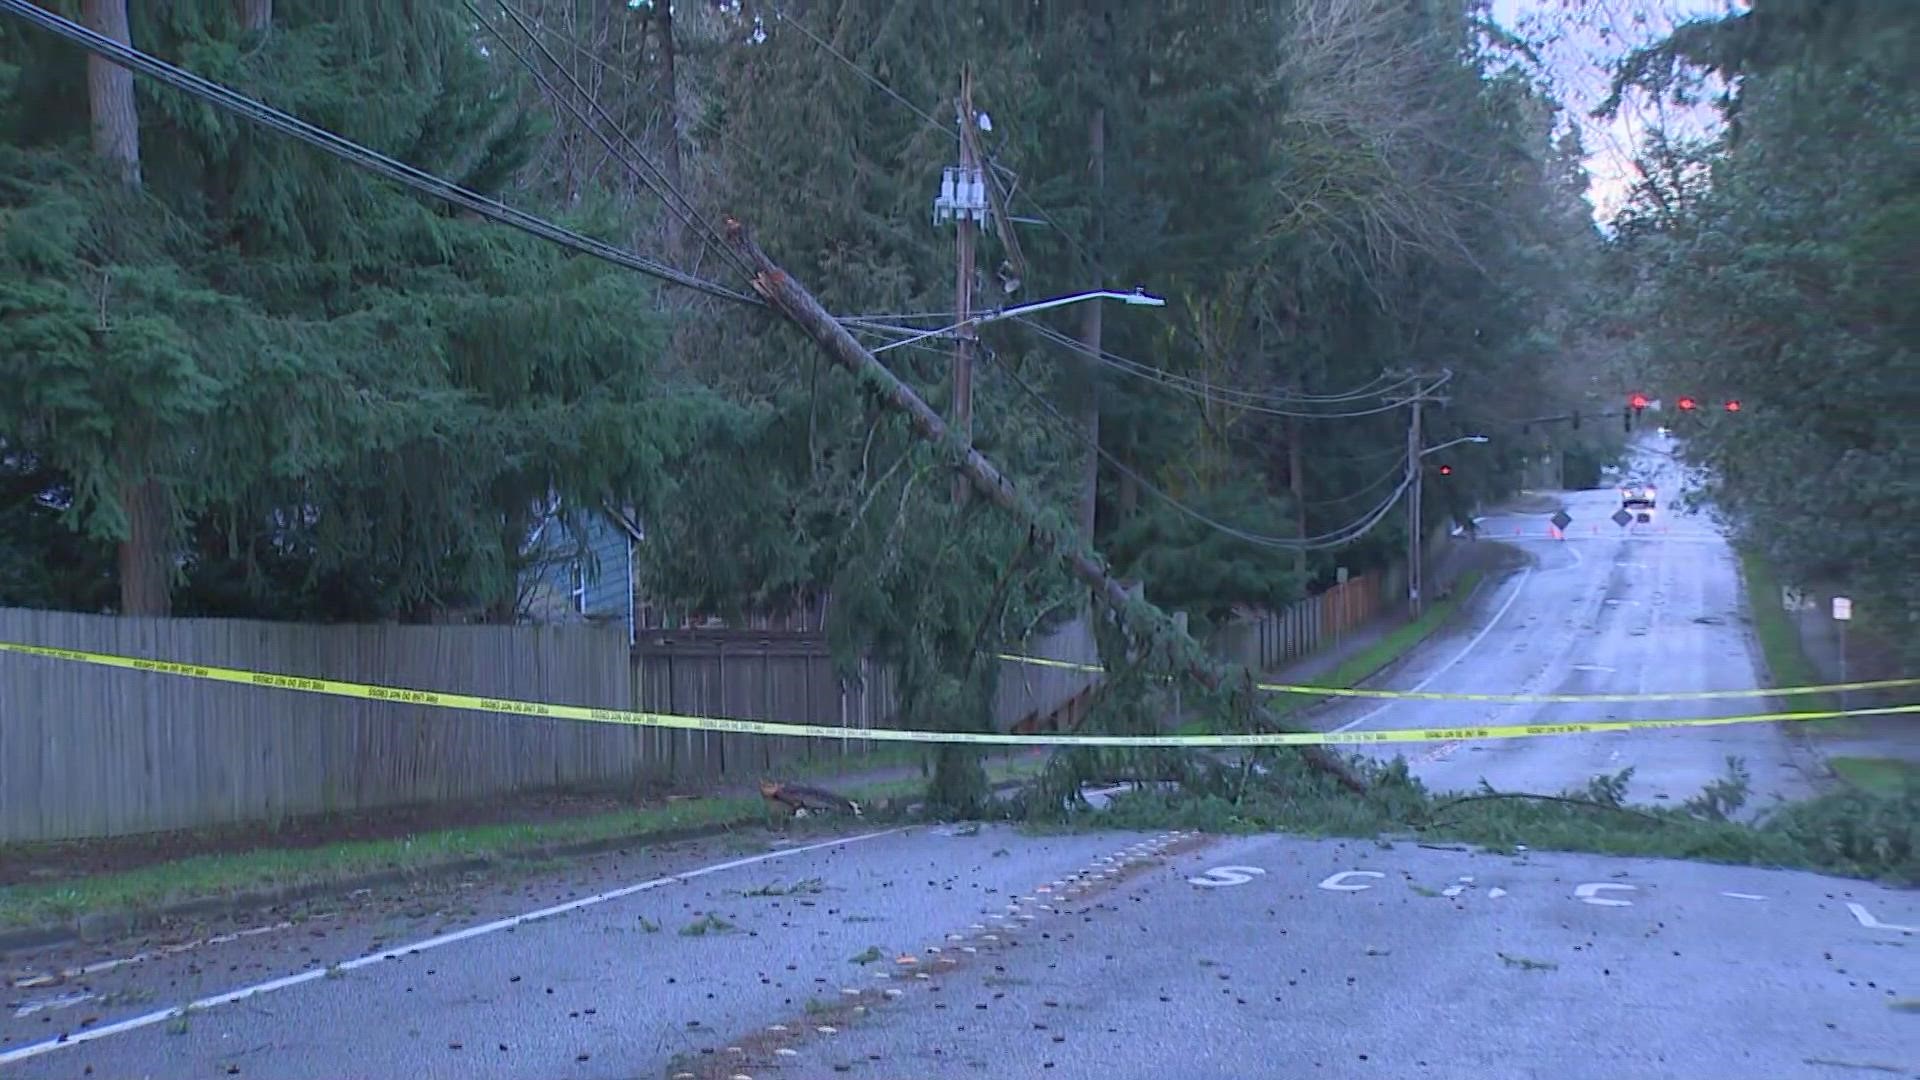 Wind gusts sent a tree crashing into powerlines on NE 104th St. in Redmond